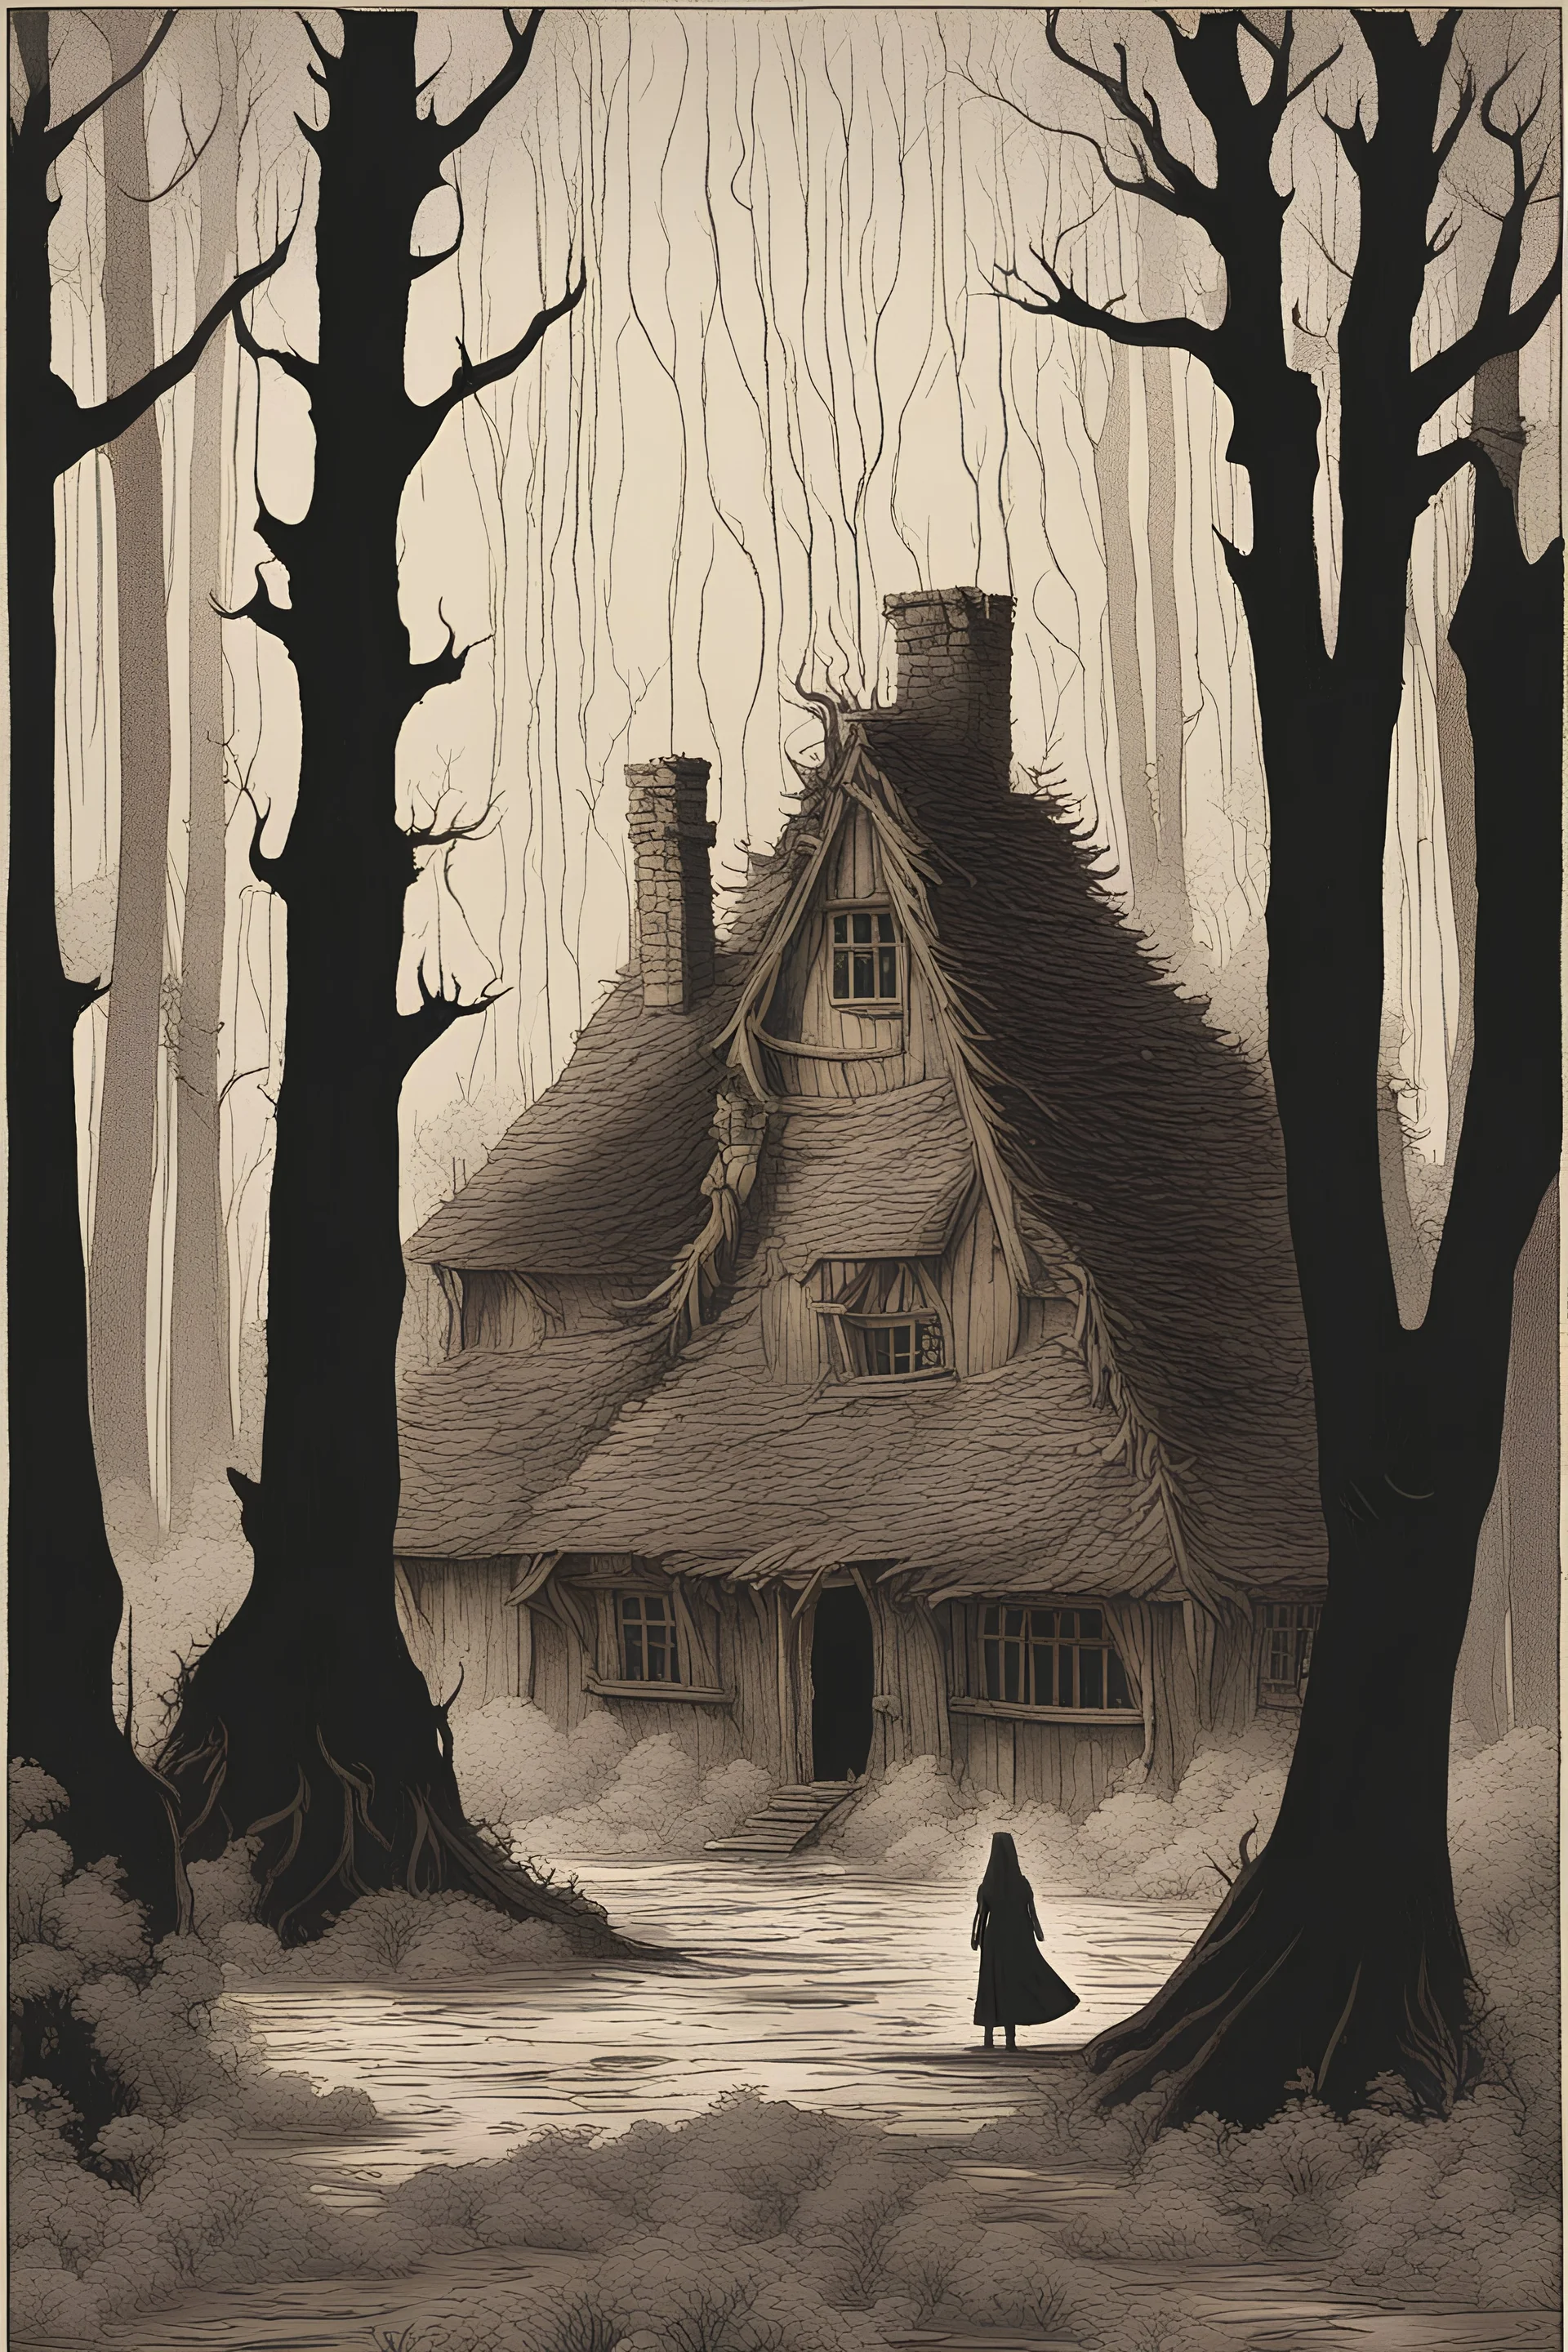 In the heart of a dense, ancient forest, a medieval cottage collapsing and barely visible engulfed in flames, its timeworn timbers crackling and sending plumes of smoke into the sky. In the foreground, a mysterious woman in silhouette stands, the house is melting like candy. the house is engulfed in flames. a woman in a cloak hides behind a tree. it is nighttime.